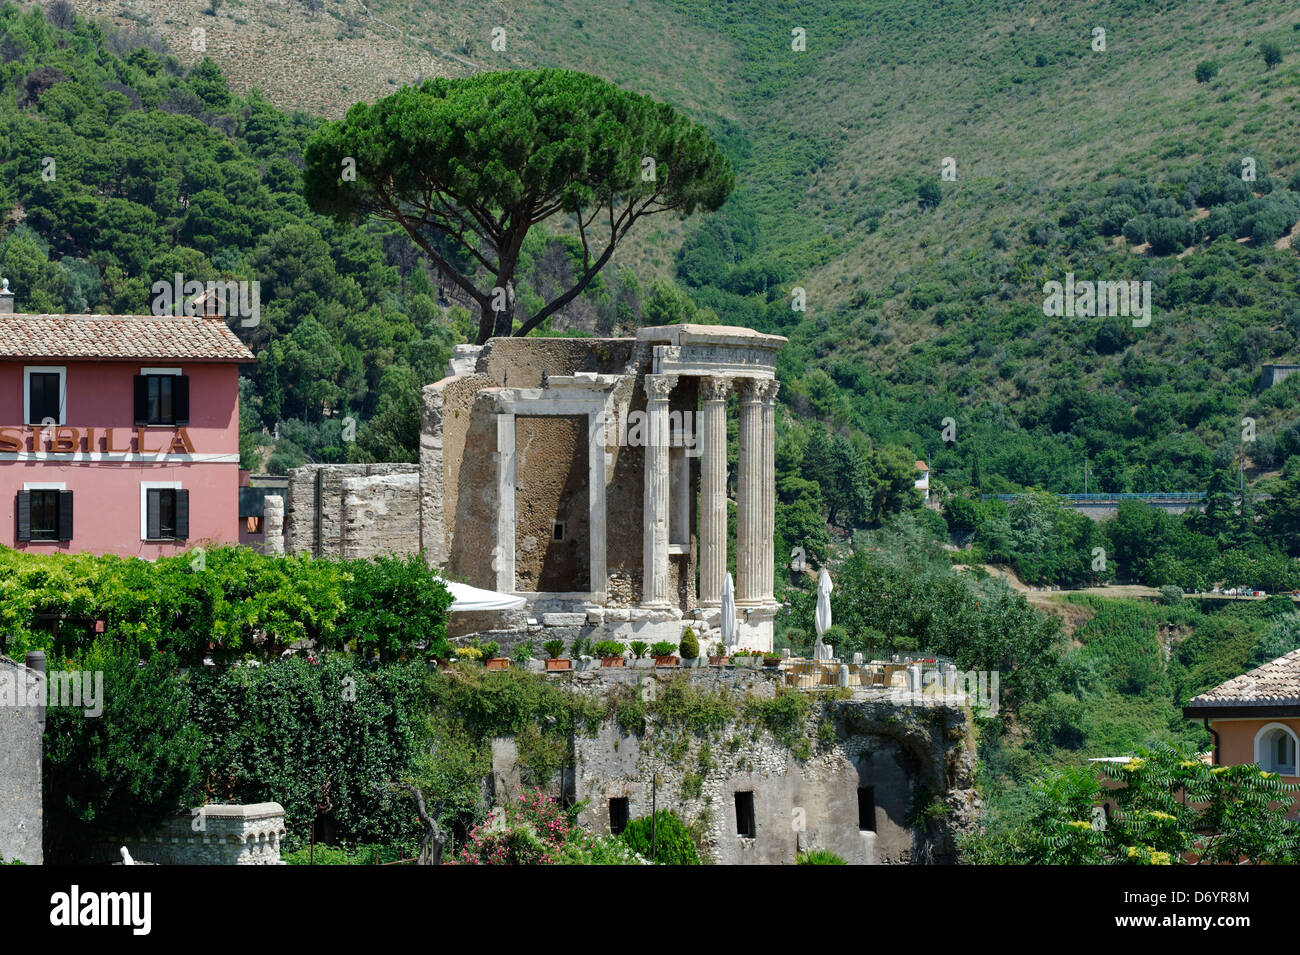 Parco Villa Gregoriana. Tivoli. Italy. View of the Roman Temple of Vesta panoramically located on the acropolis overlooking the Stock Photo